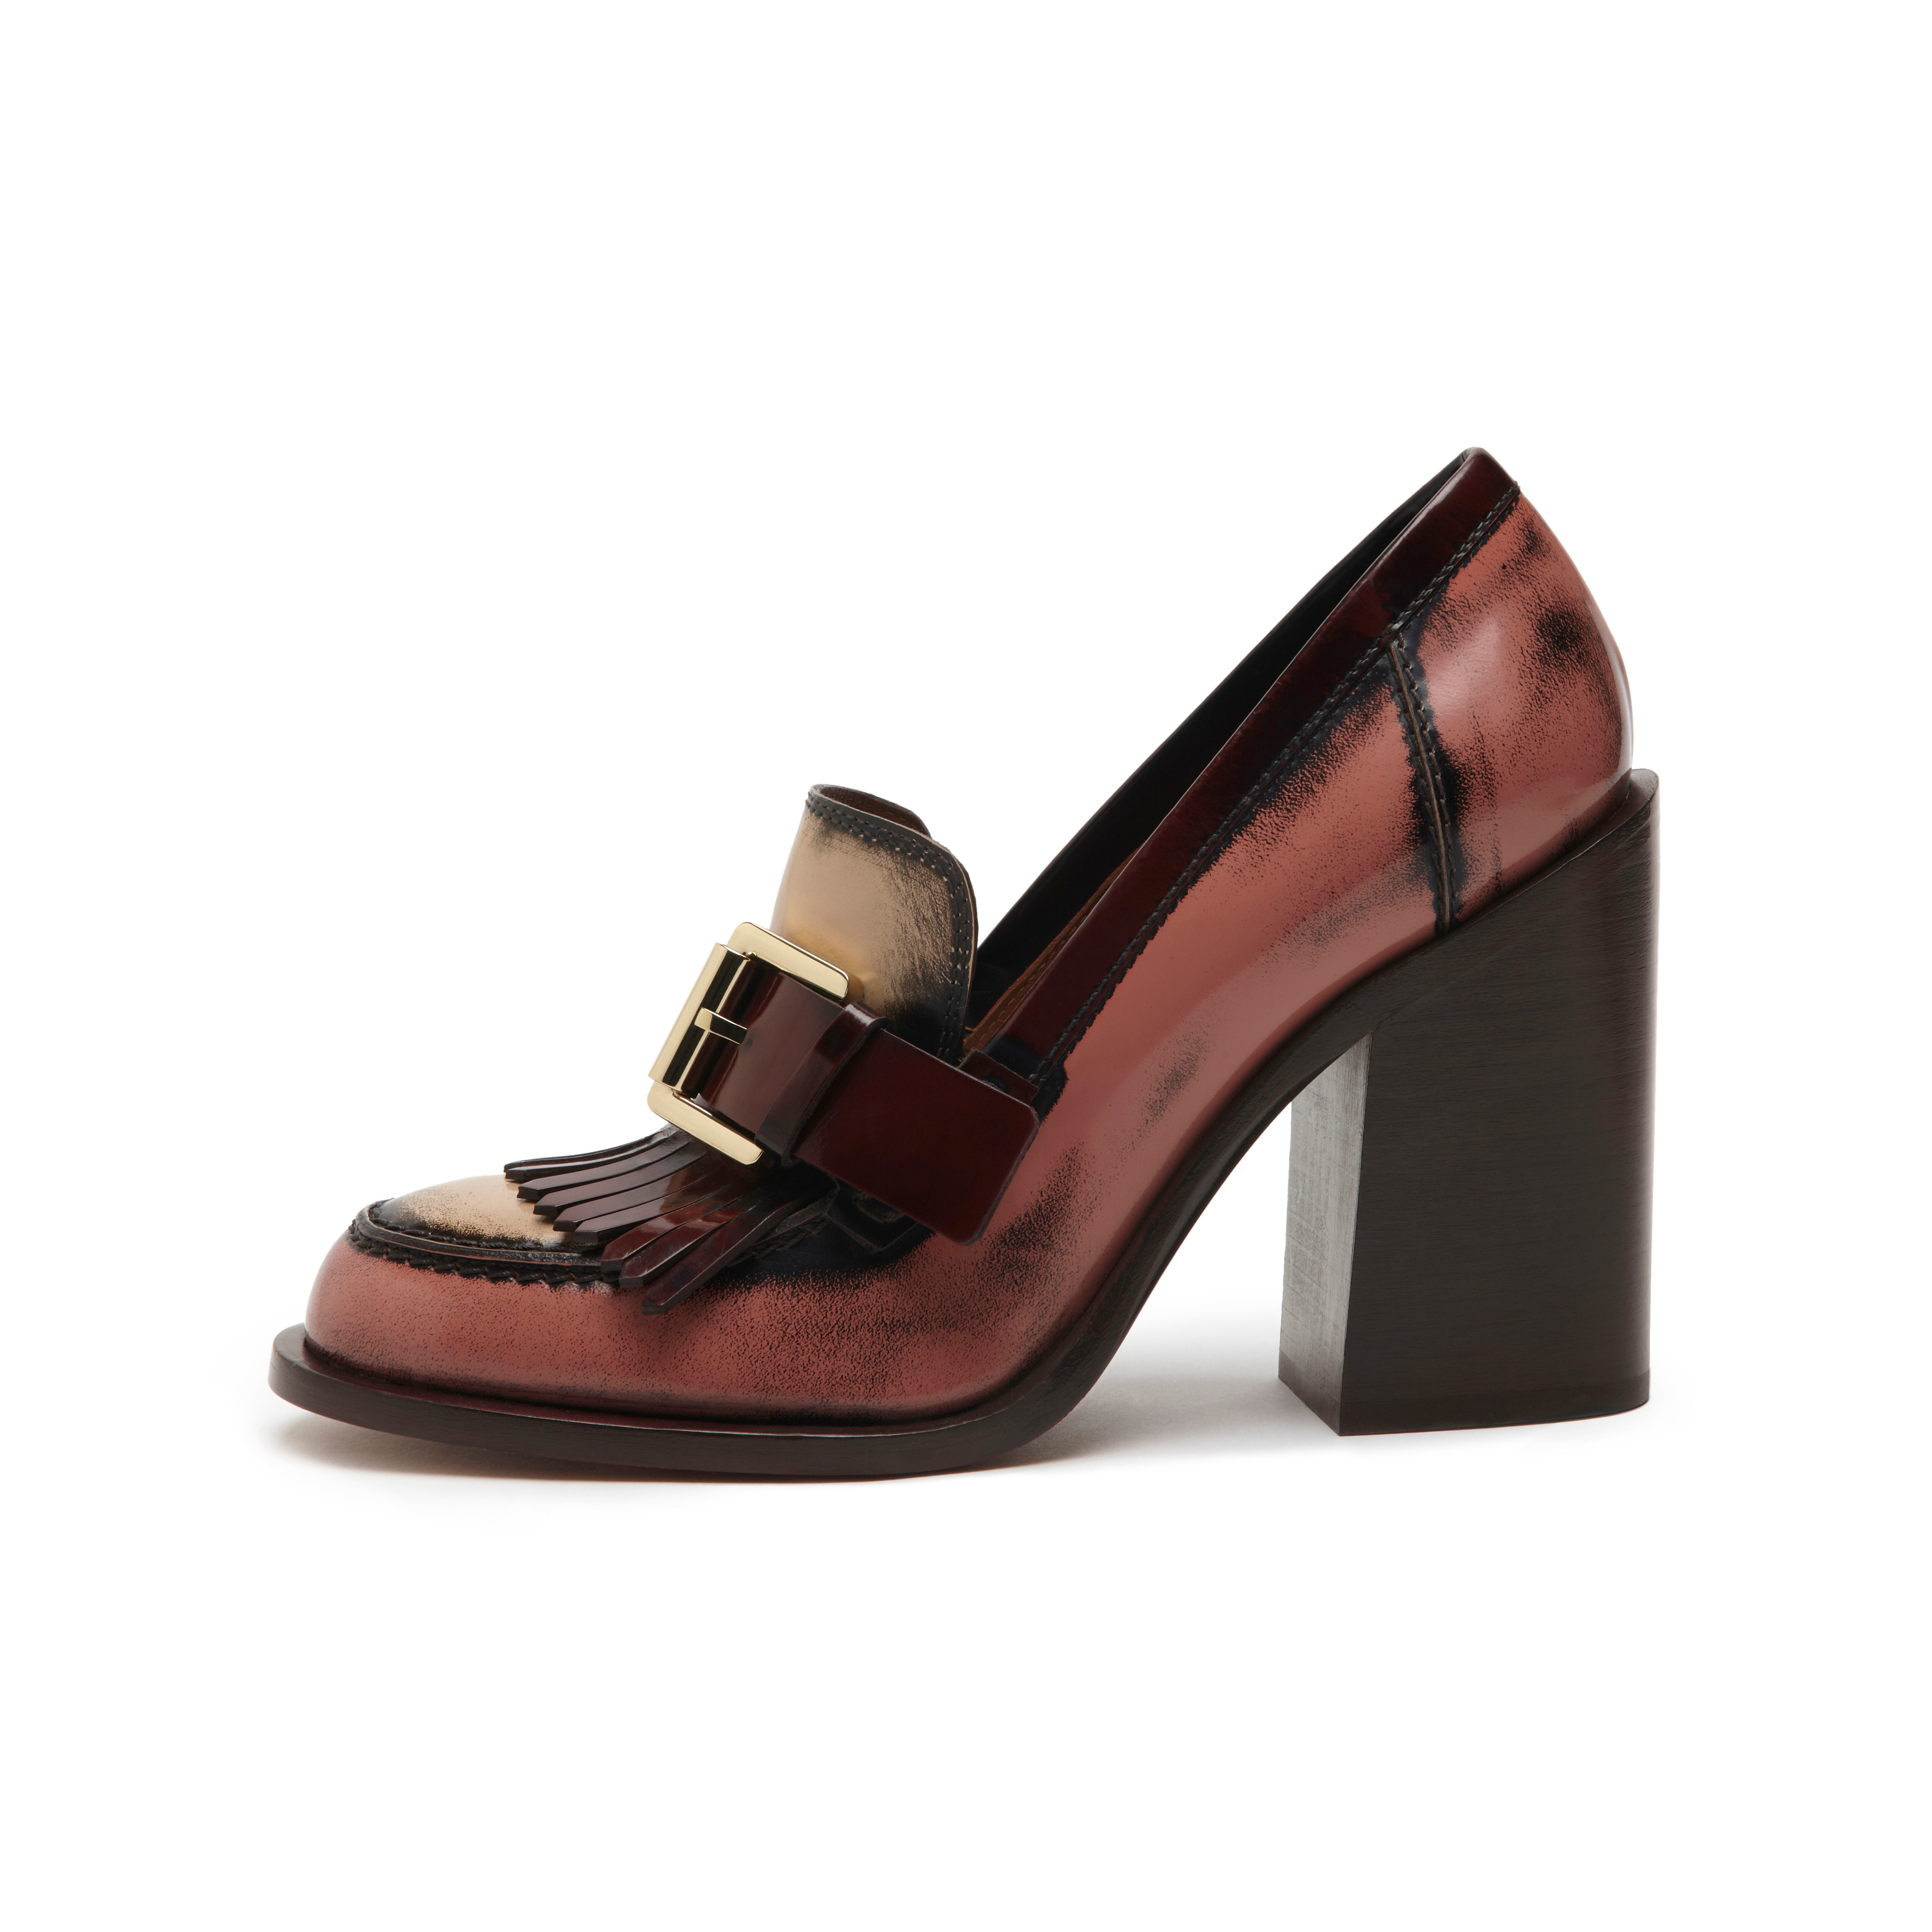 Lyst - Mulberry Darby High Heel Loafer in Brown